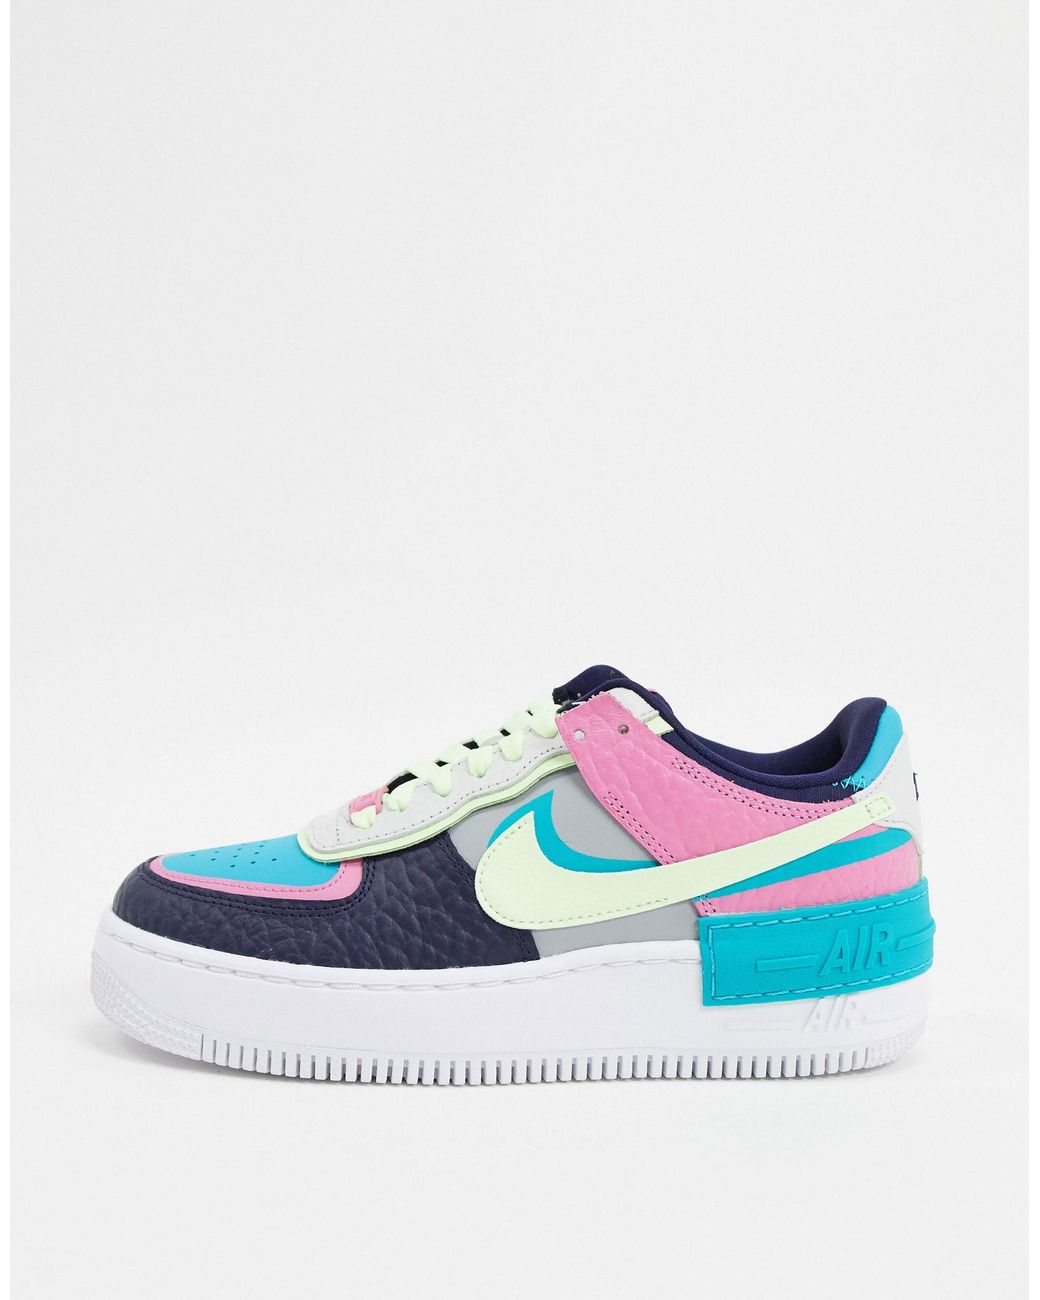 Nike Air Force 1 Shadow Idealo Shop Clearance, 56% OFF |  doonbiblecollege.org